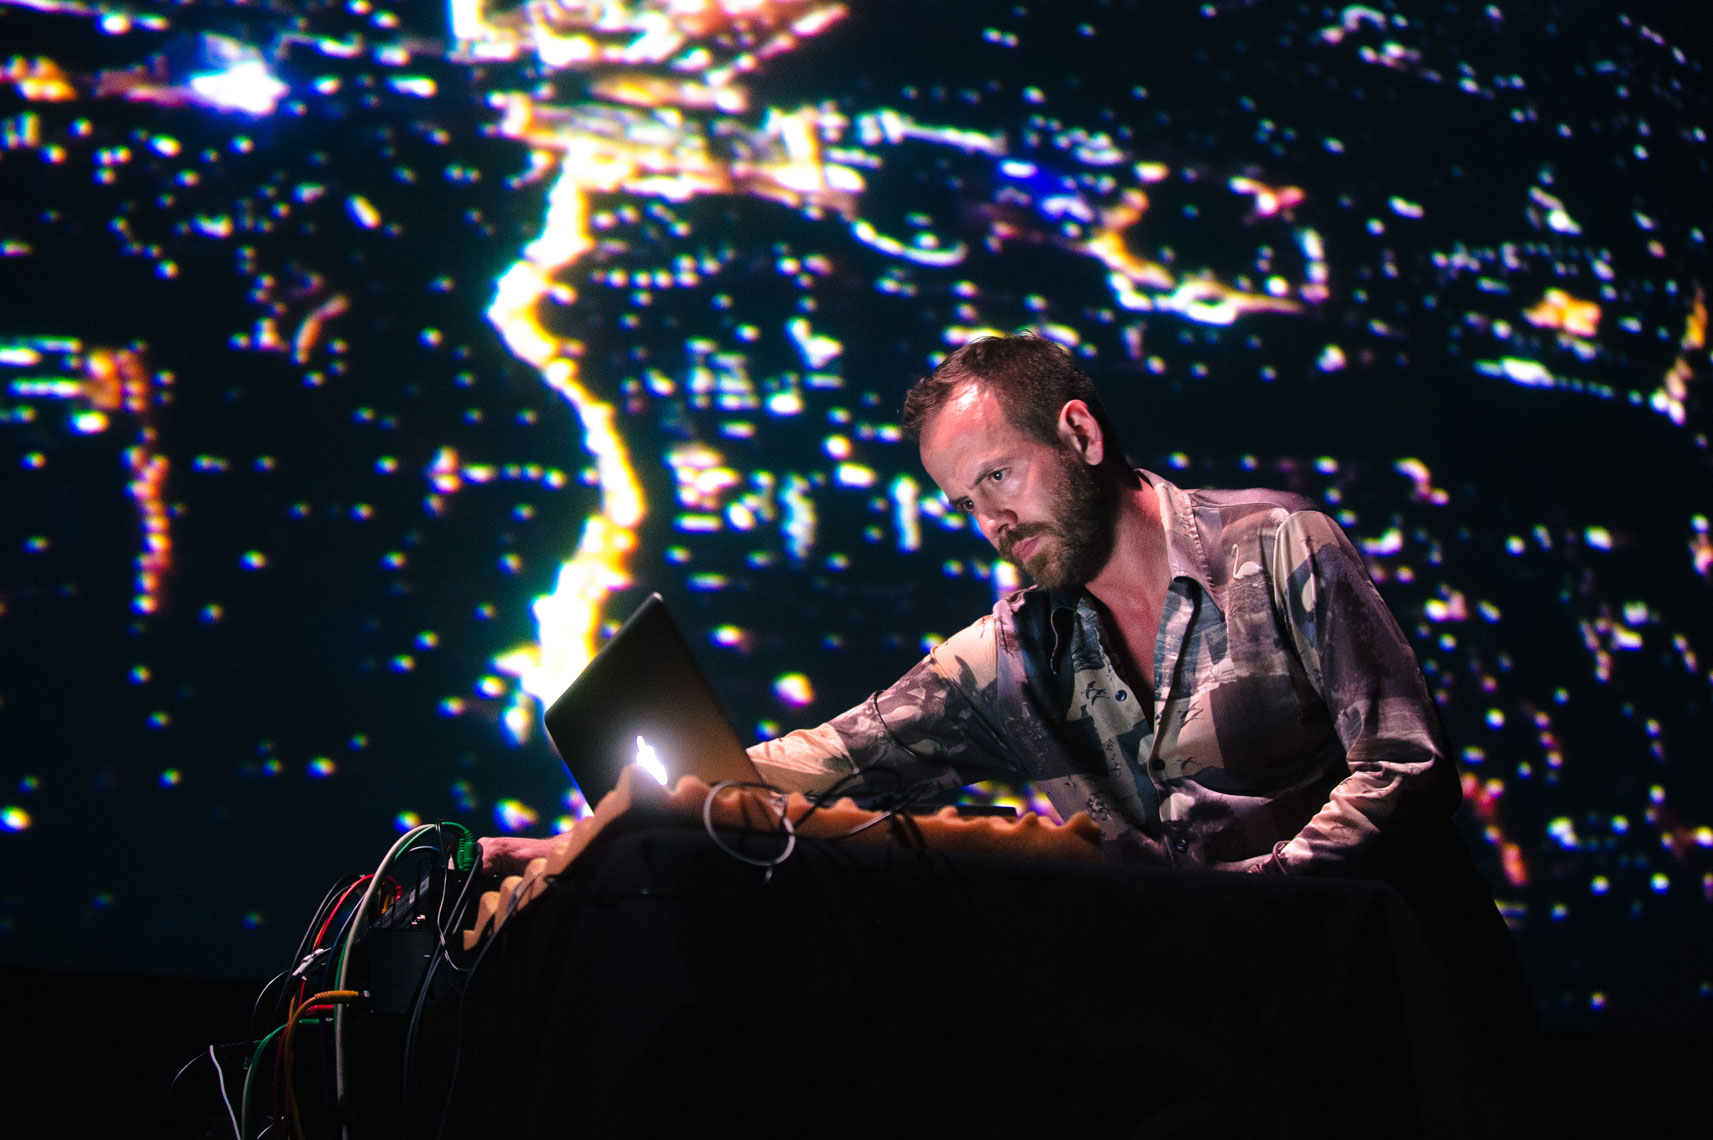 Ulrich-Schnauss-performs-at-the-2013-Mountain-Oasis-Electronic-Music-Summit